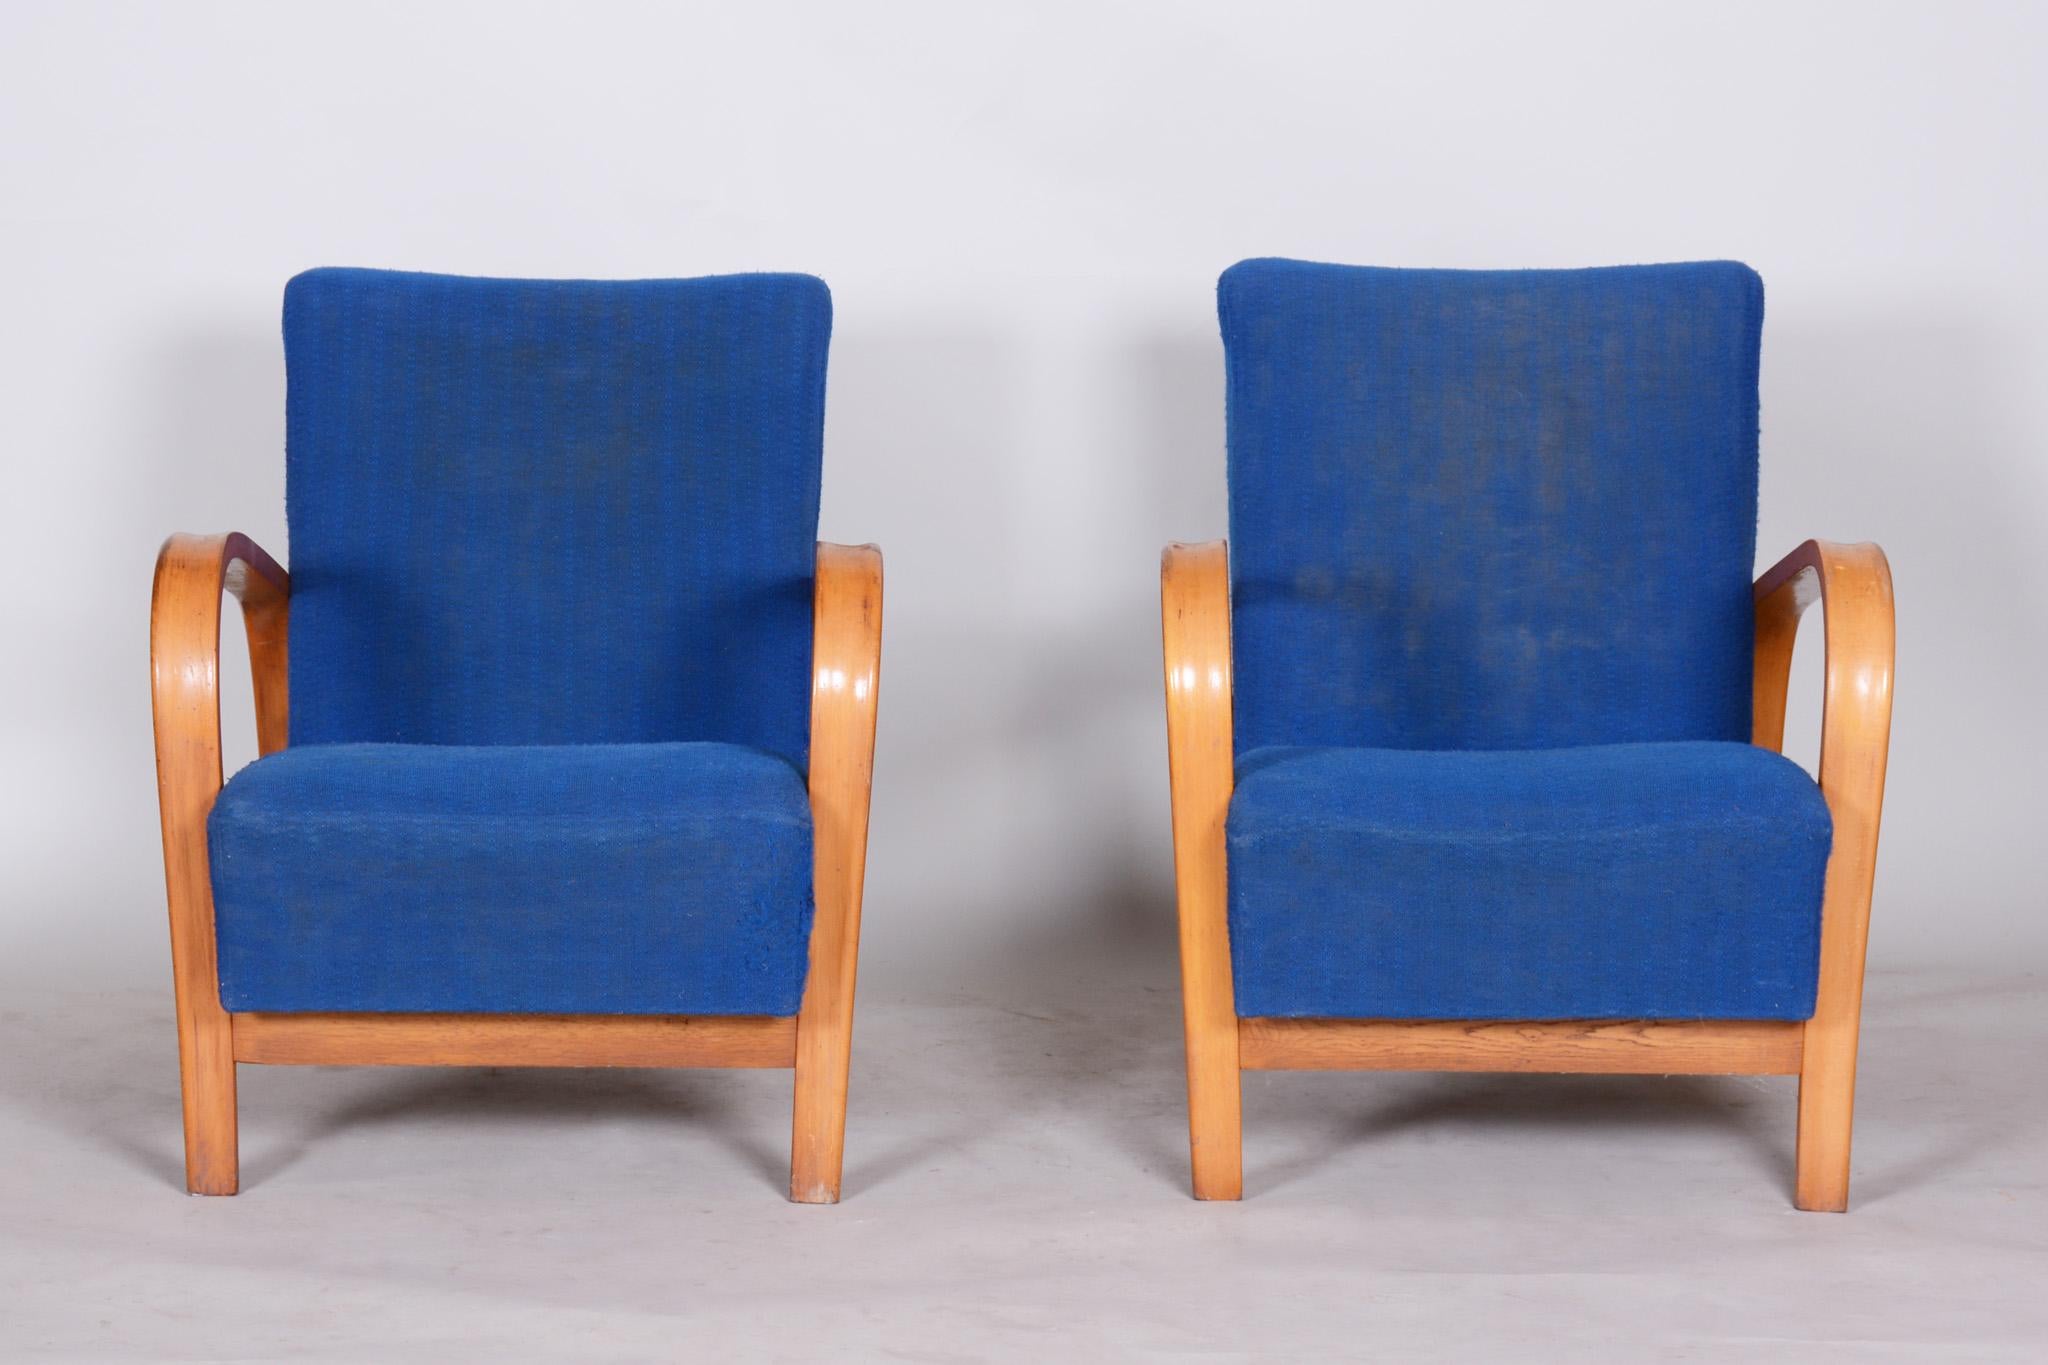 20th Century Pair of Mid Century Armchairs Made in Czechia 1930s, Collaboration with Halabala